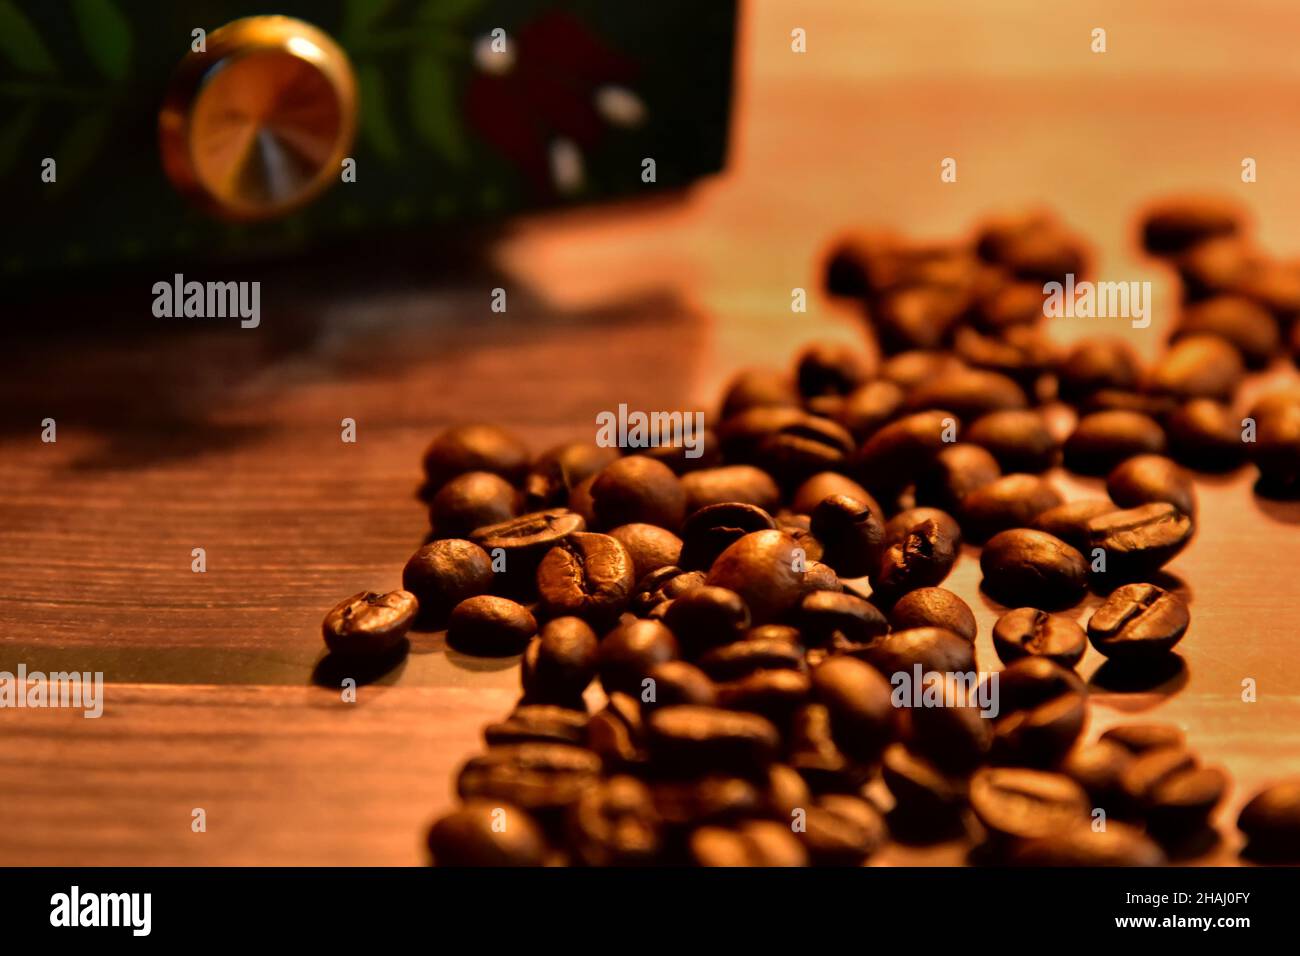 https://c8.alamy.com/comp/2HAJ0FY/vintage-coffee-concept-with-selective-focus-on-roasted-coffee-beans-and-old-coffee-grinder-in-the-background-2HAJ0FY.jpg